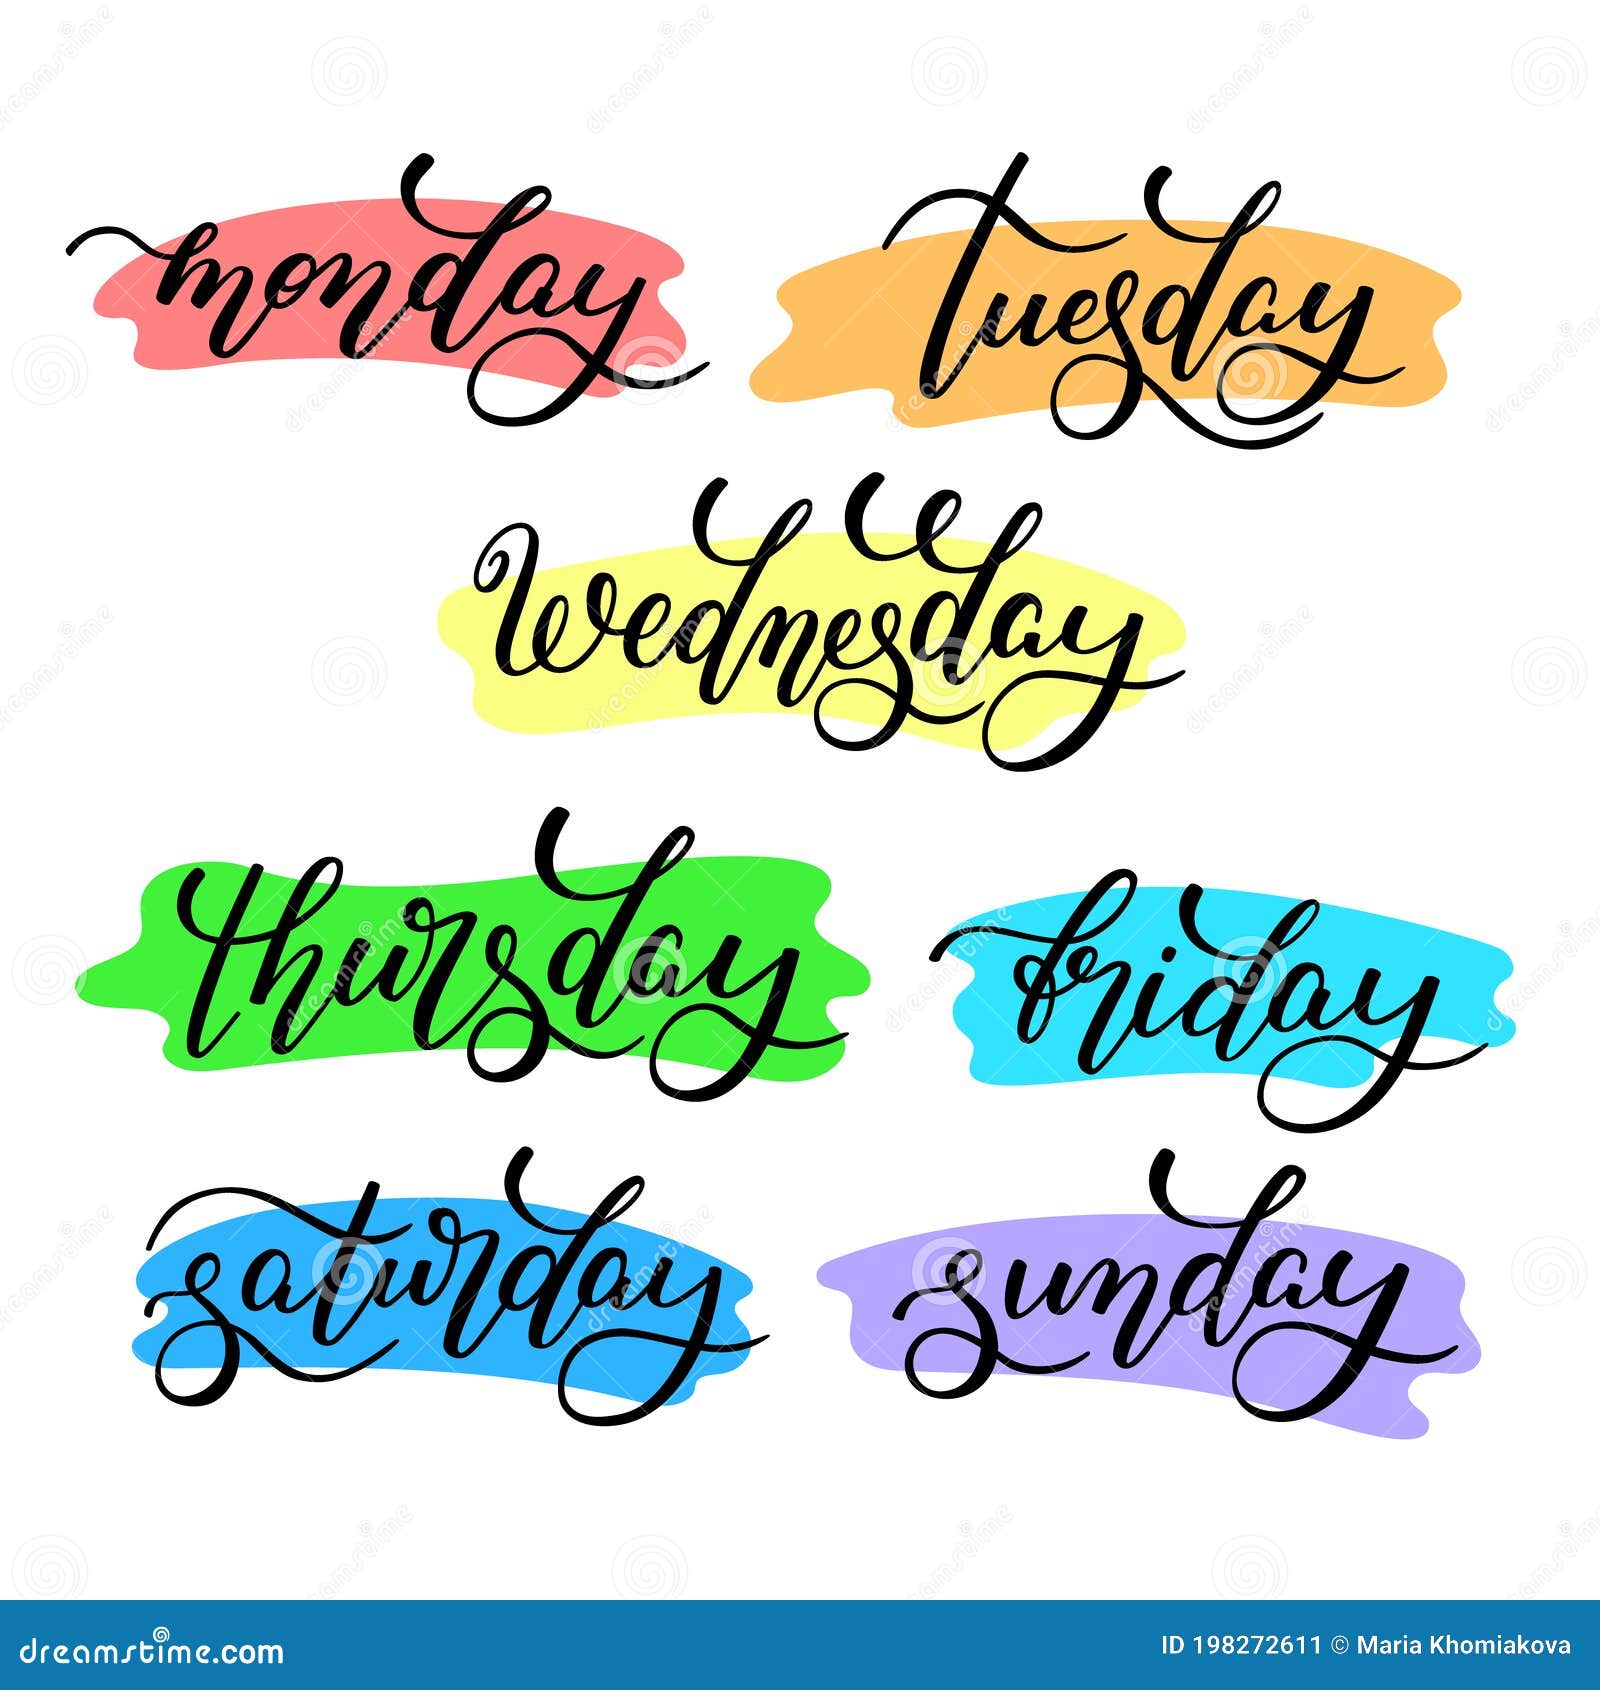 Lettering Days of the Week - Monday, Tuesday, Wednesday, Thursday ...